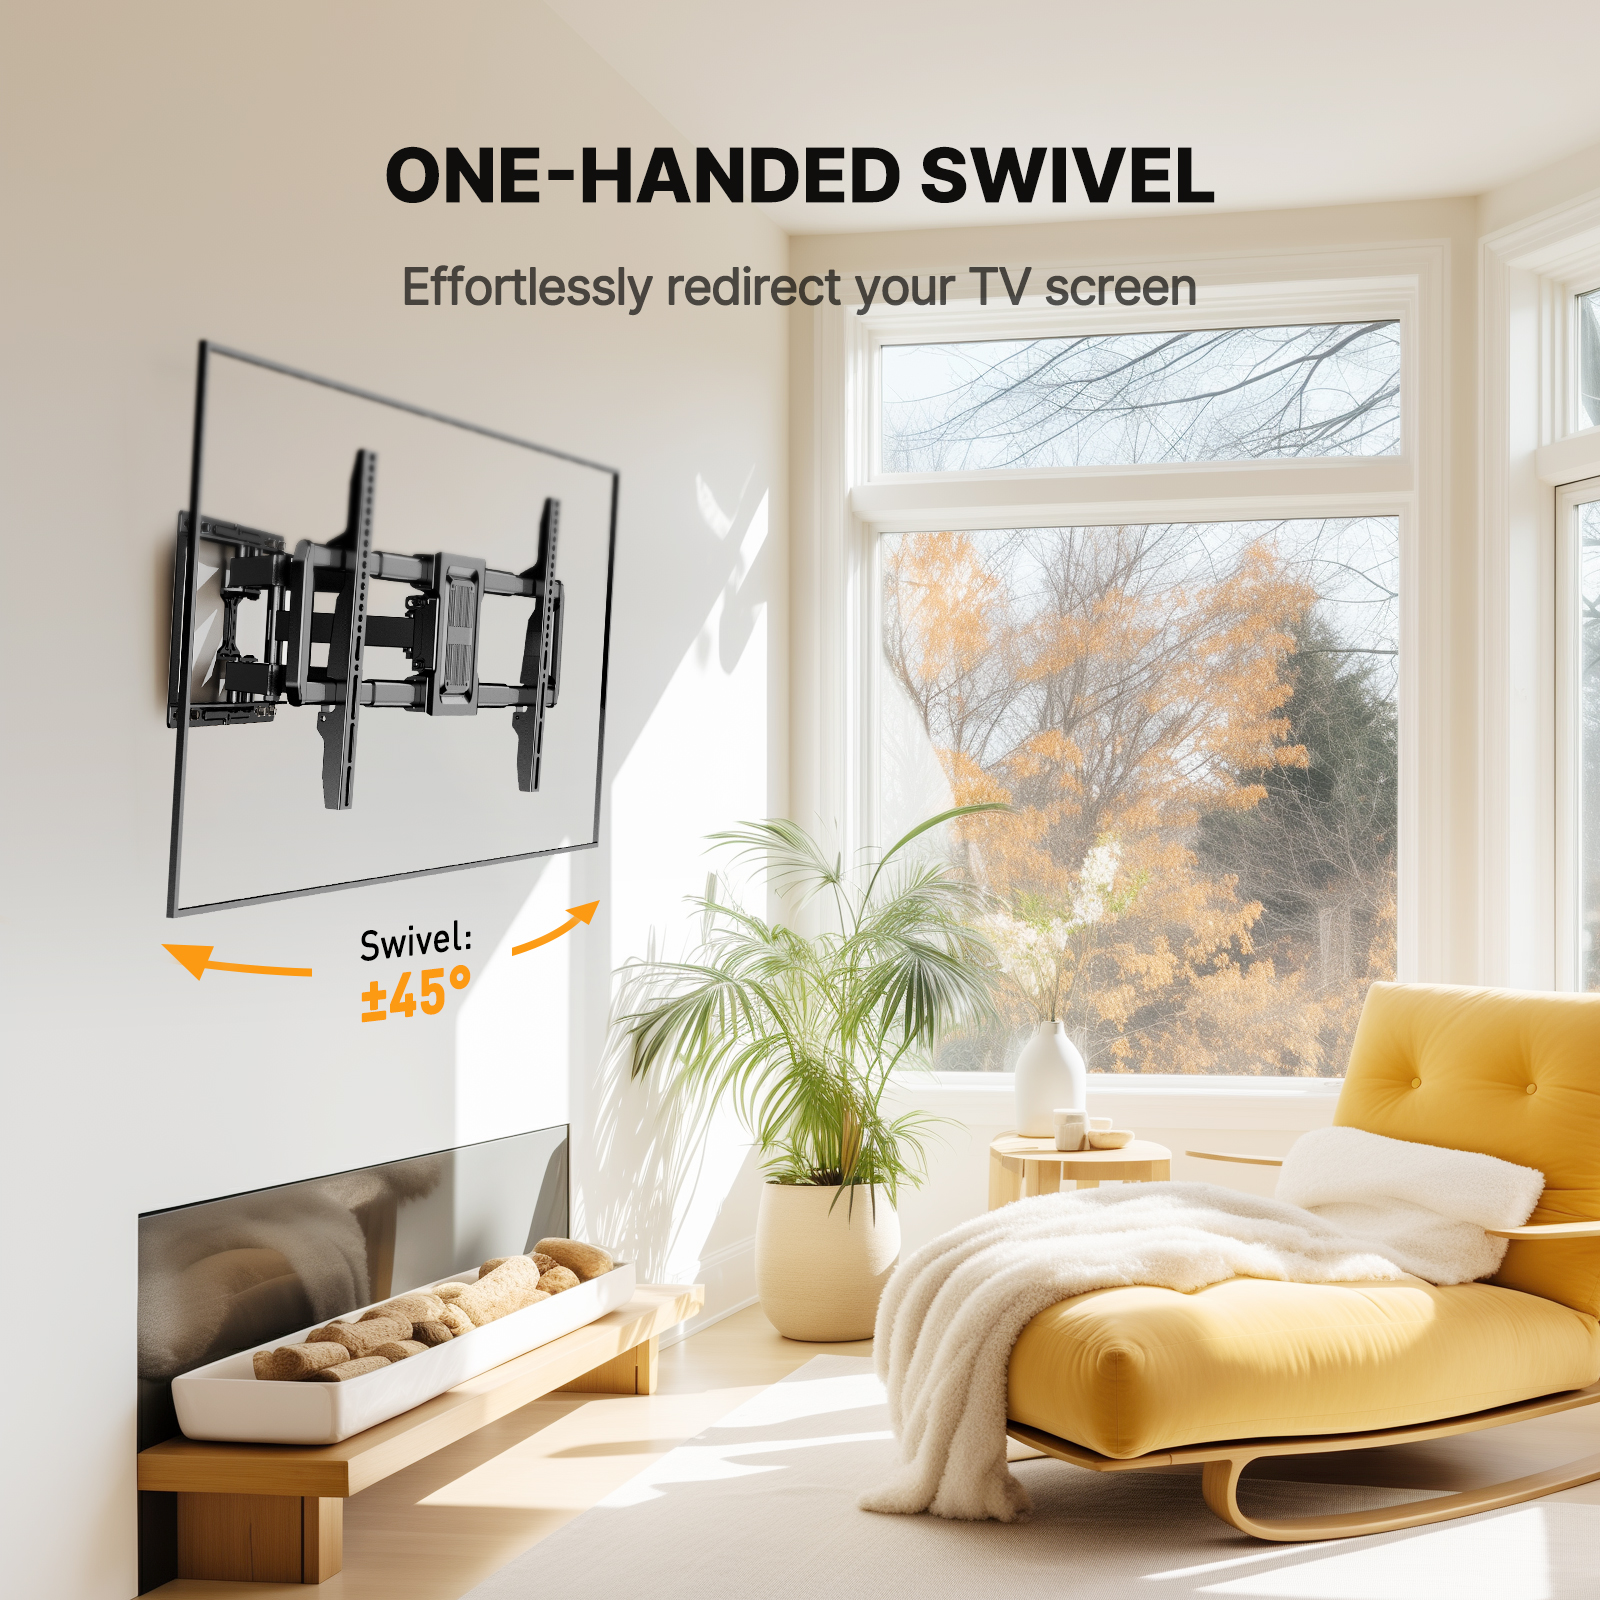 Full Motion TV Wall Mount for 40-82 inch TVs with Swivel, Tilting & Extension Max 600x400, up to 100 lbs - image 5 of 7